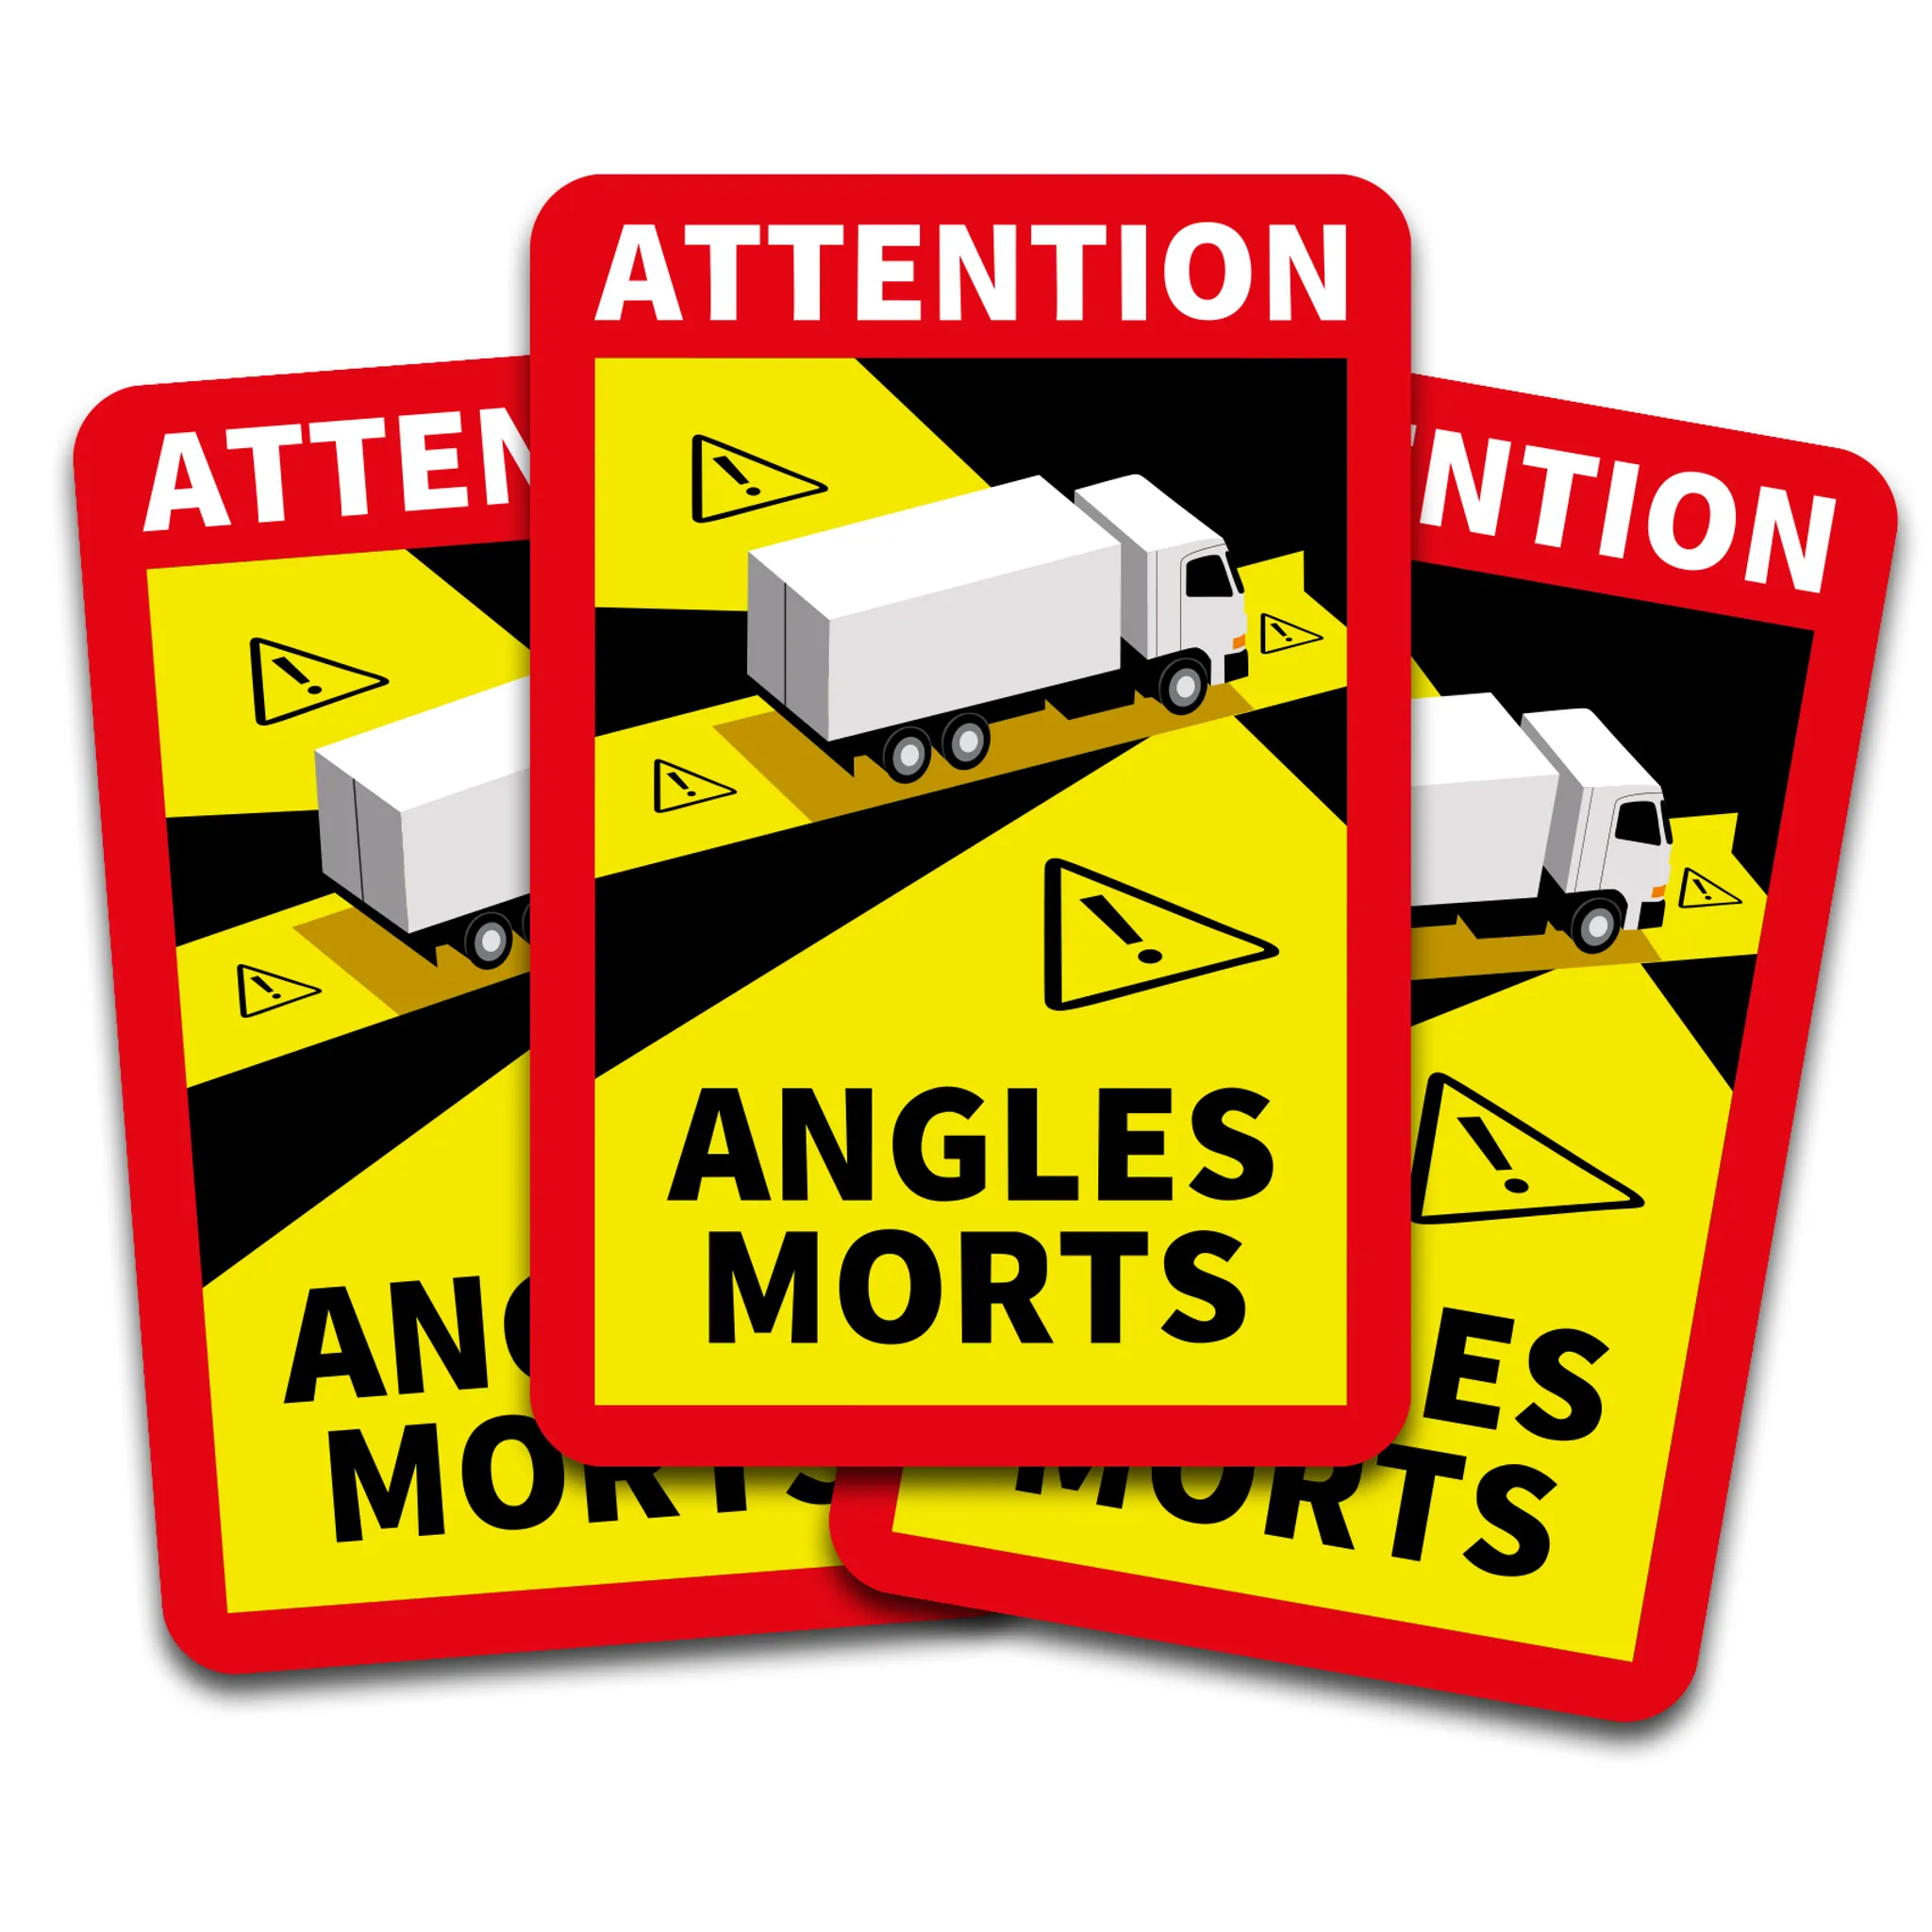 Magnetaufkleber Attention Angles Morts! Wohnmobil online bei fa